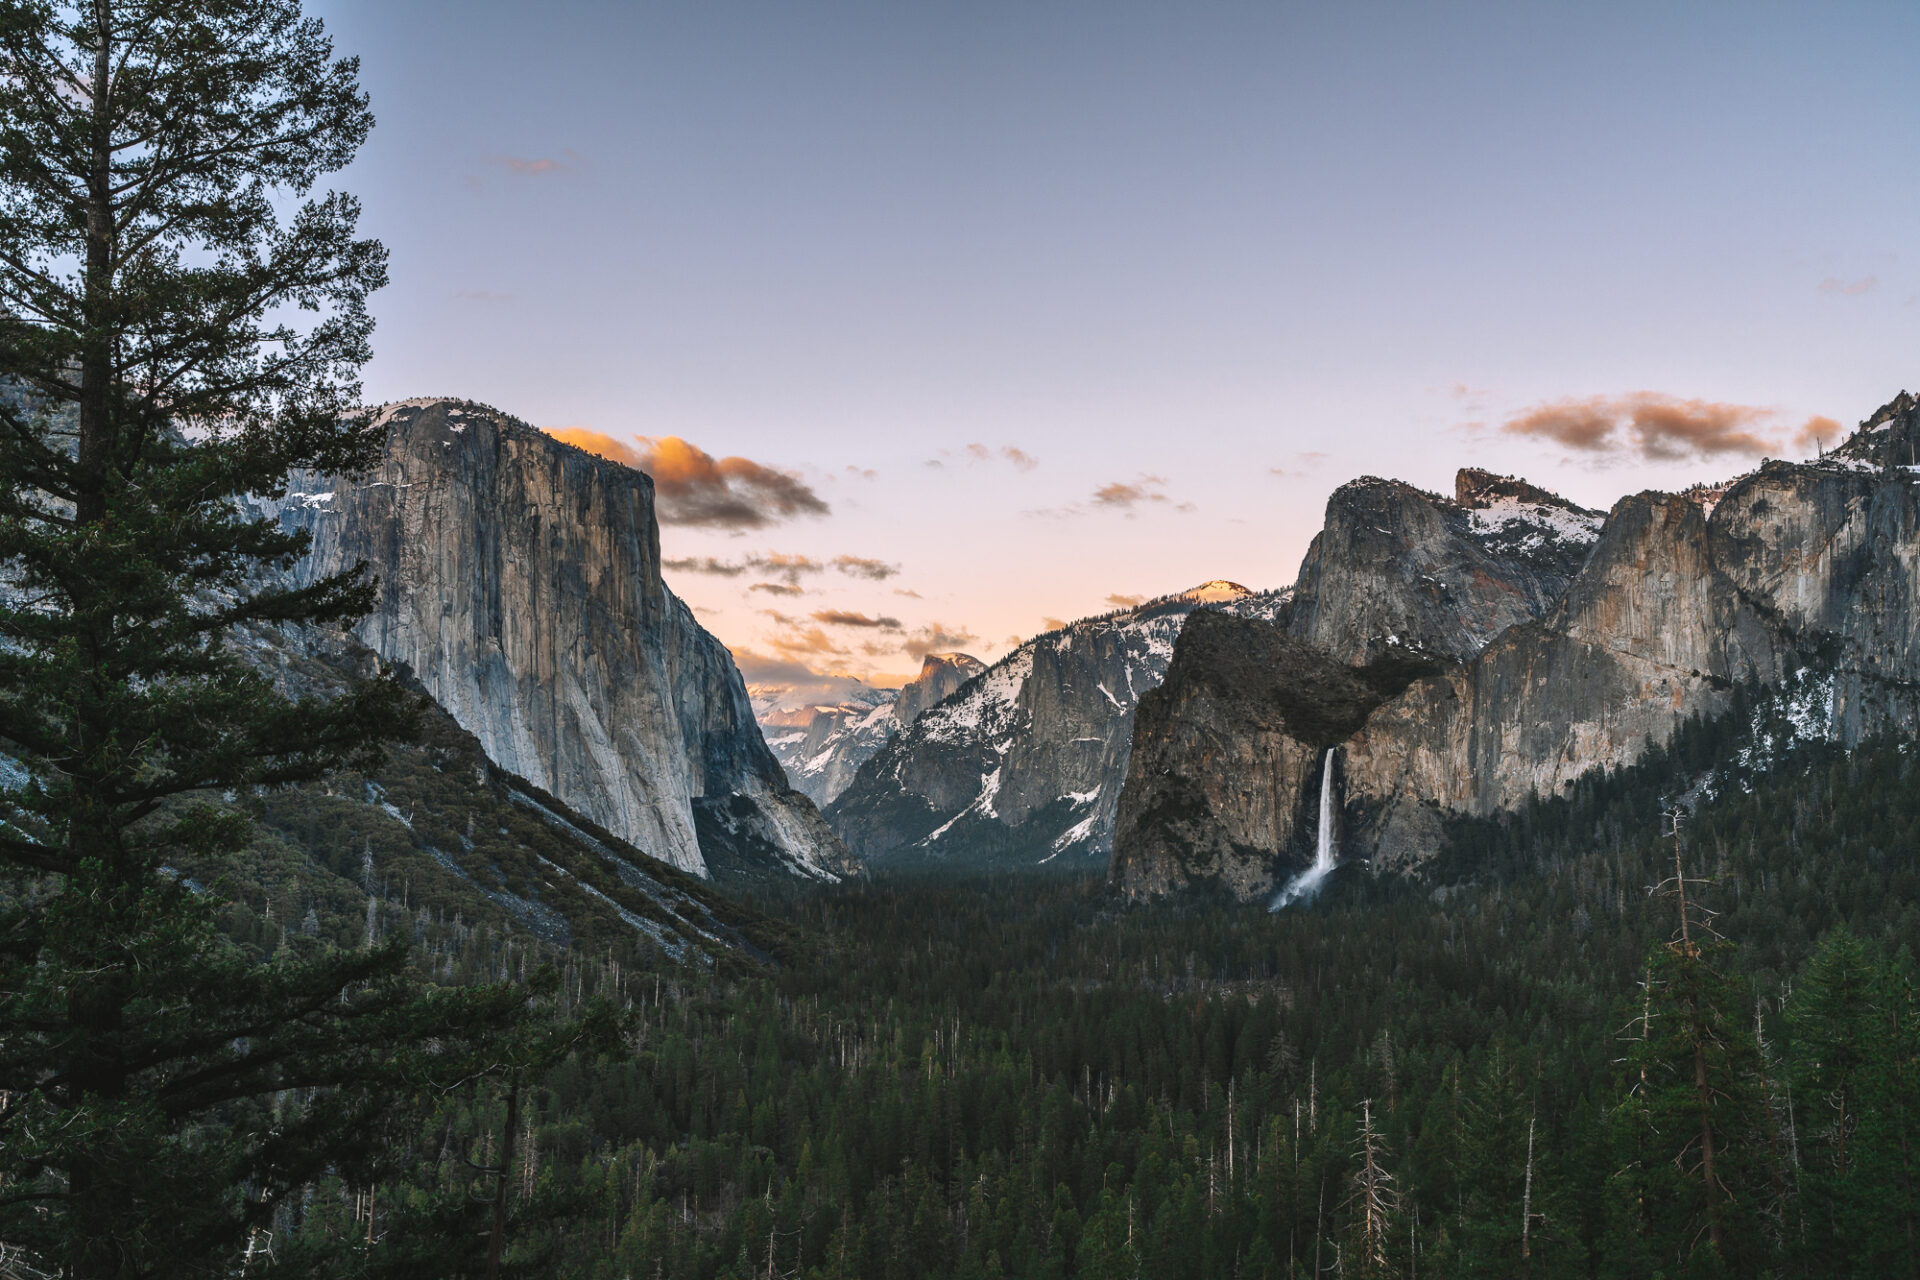 Tunnel View at sunset, Yosemite National Park